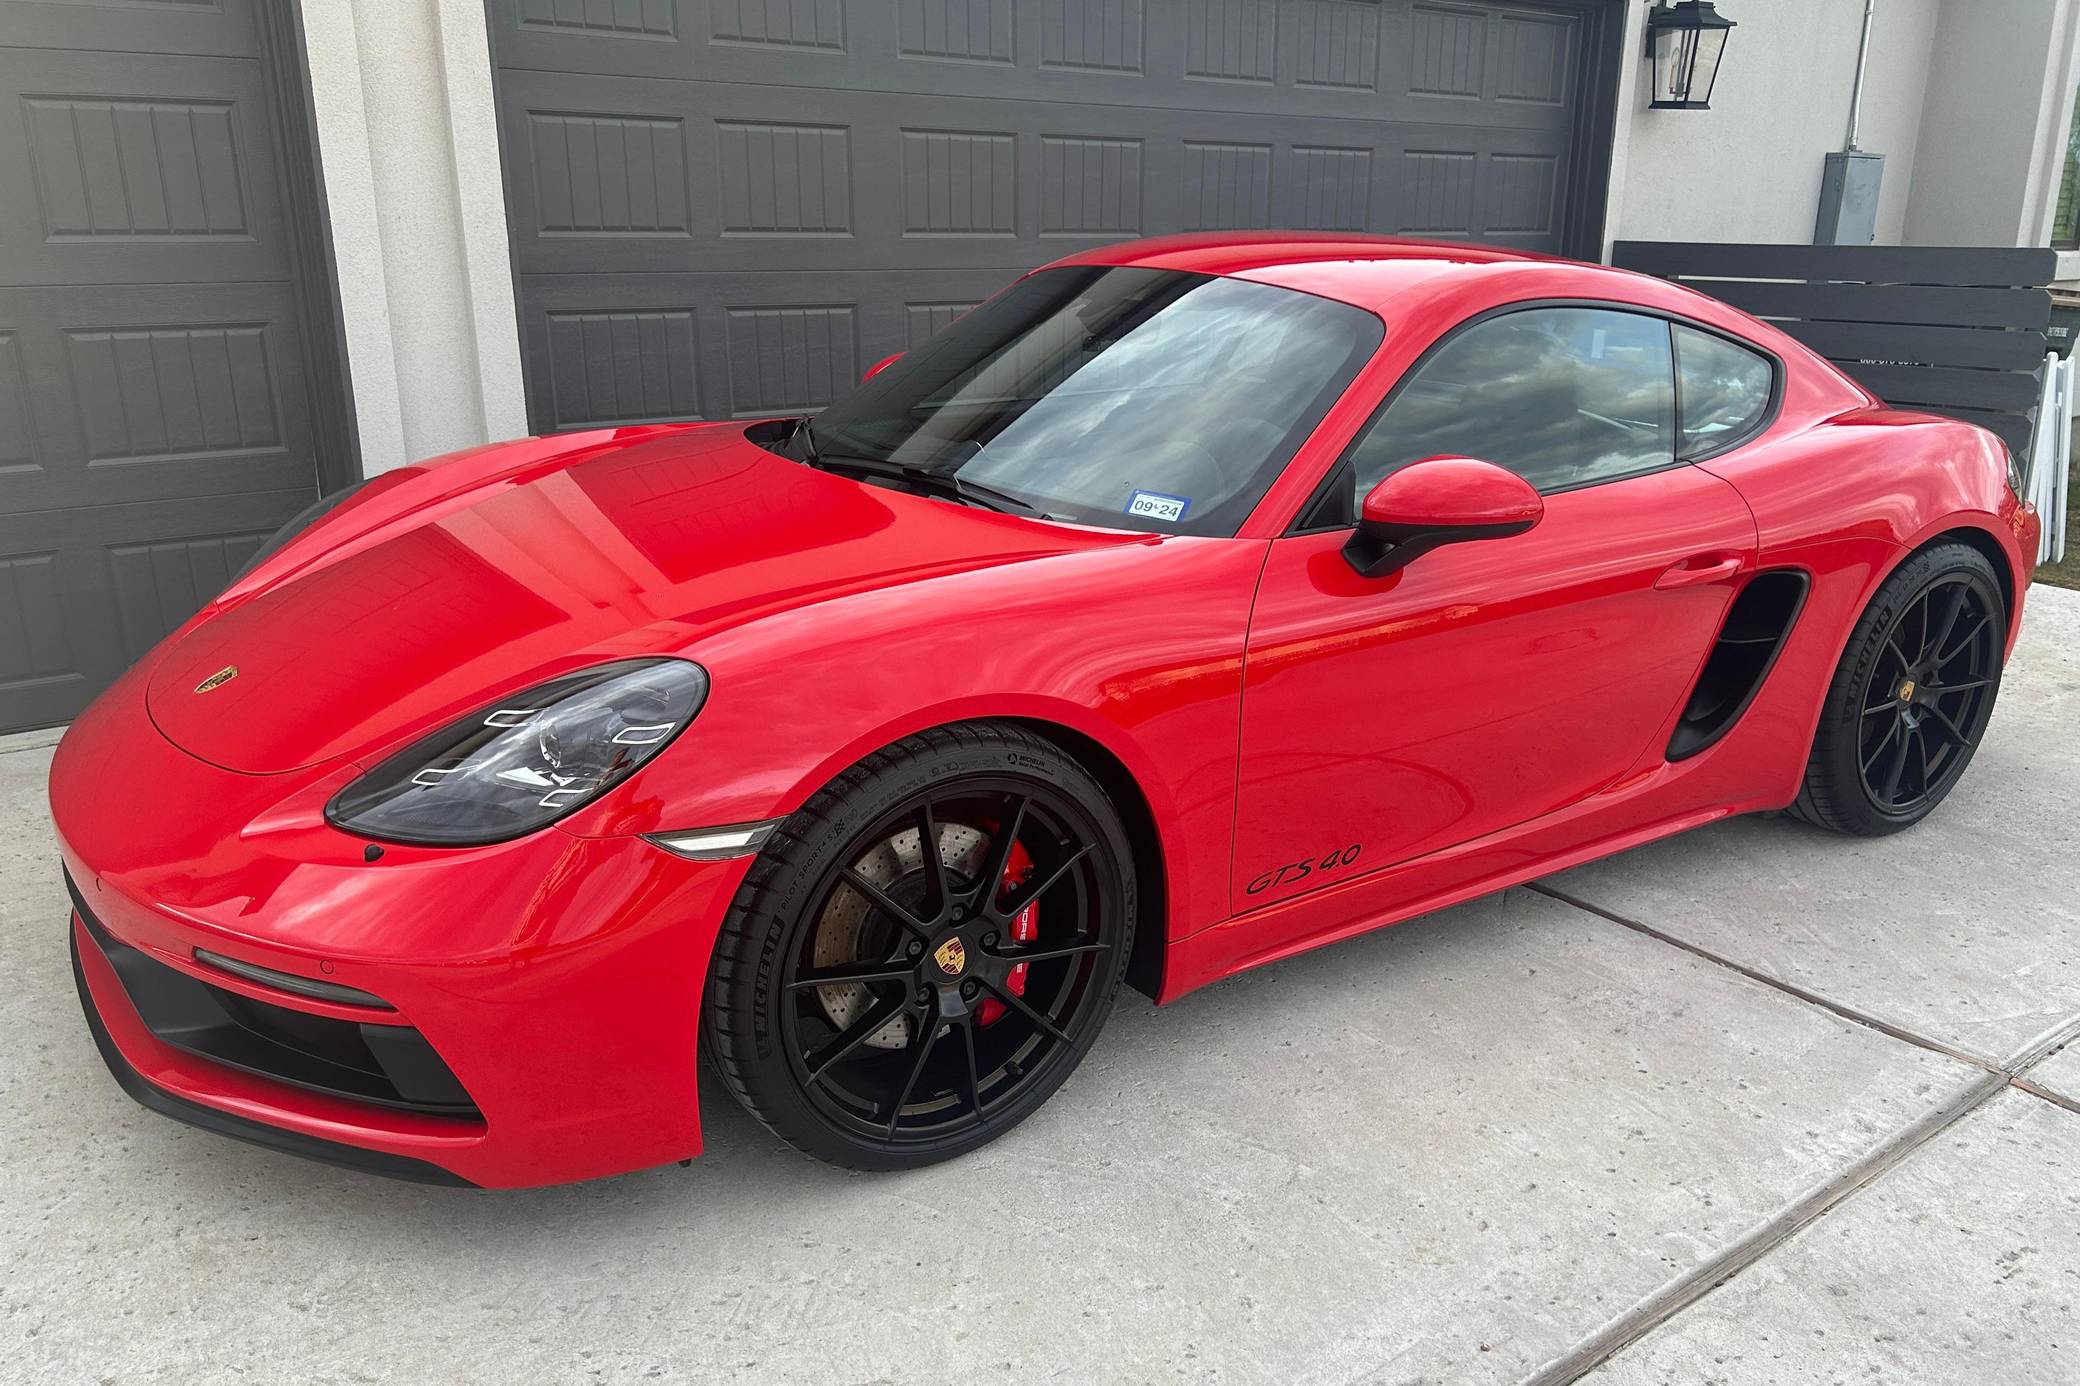 The 2021 Porsche Cayman GTS 4.0 May Be the Best Porsche to Buy